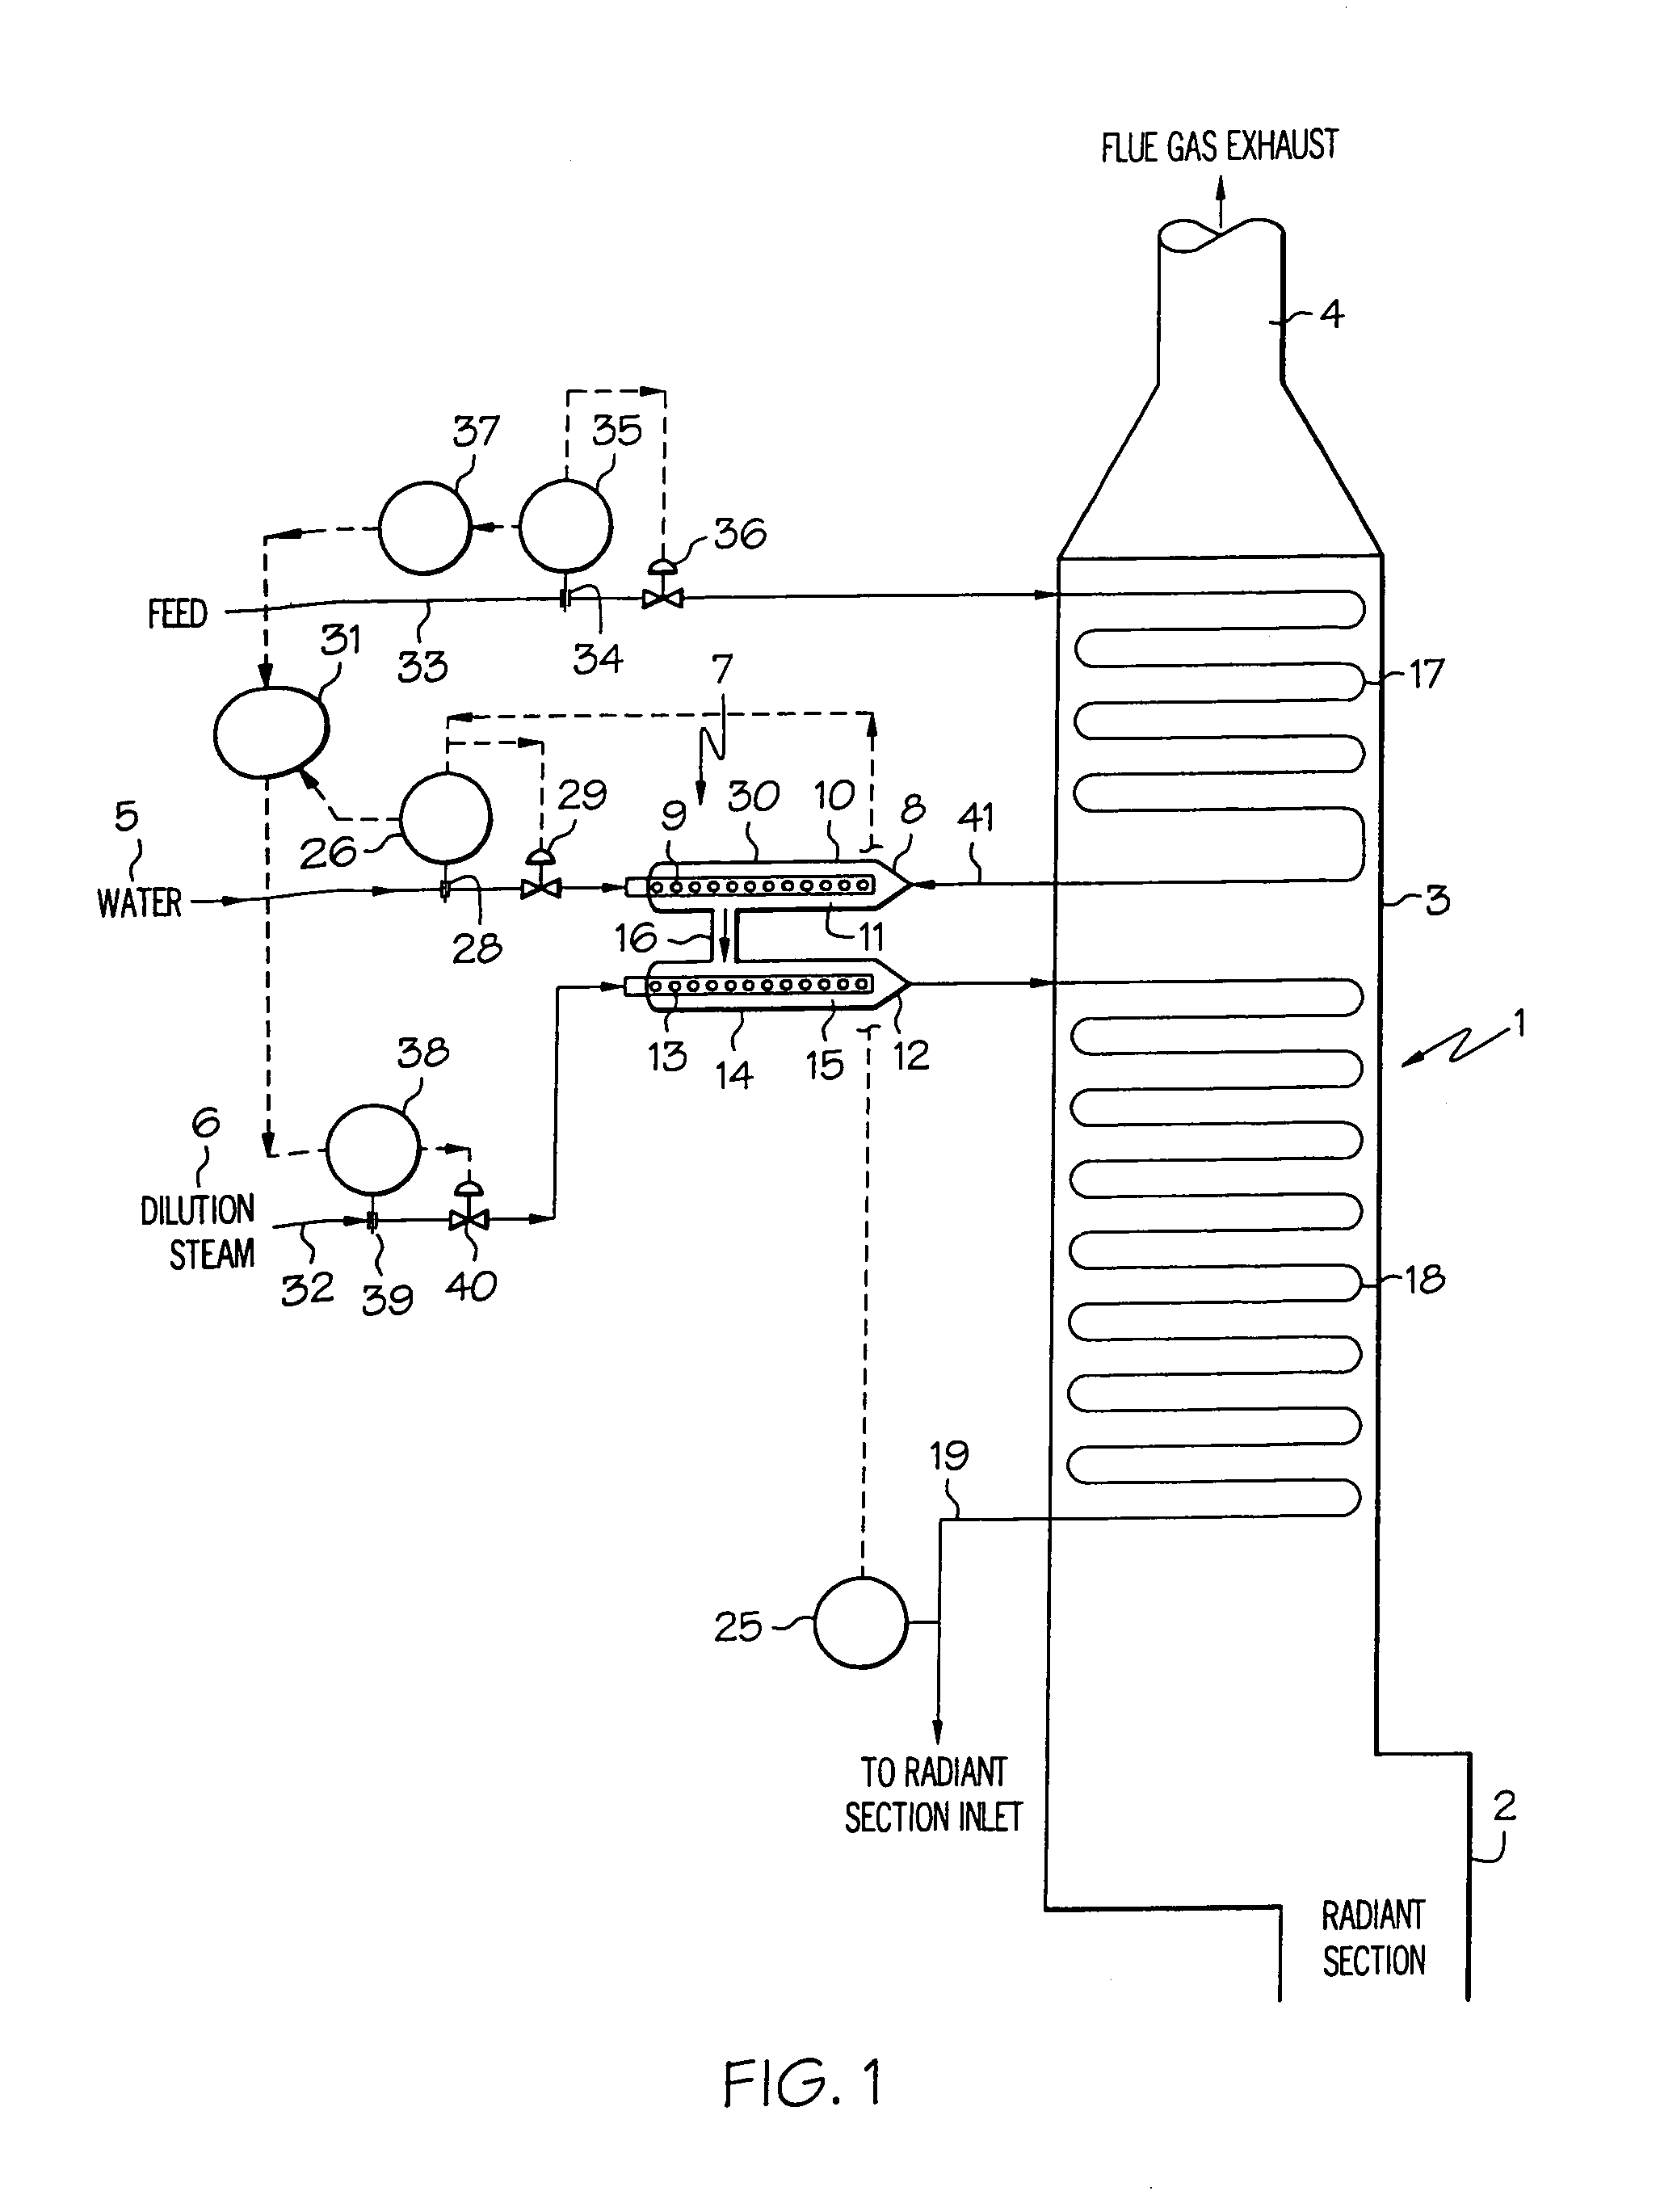 Process for cracking hydrocarbon feed with water substitution